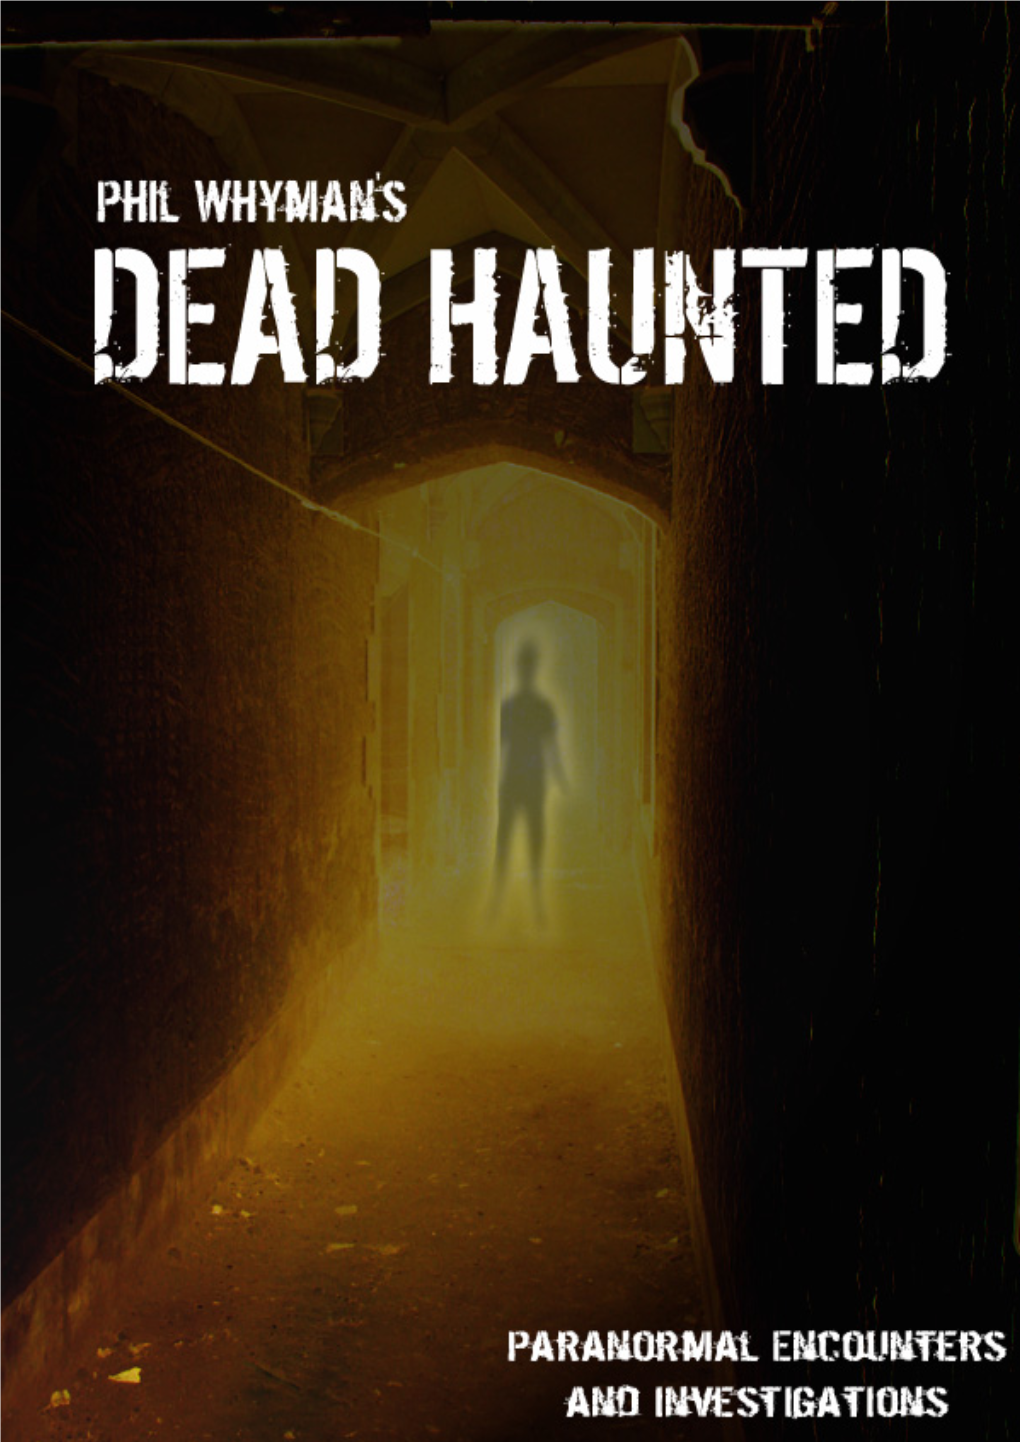 Phil Whyman's DEAD HAUNTED